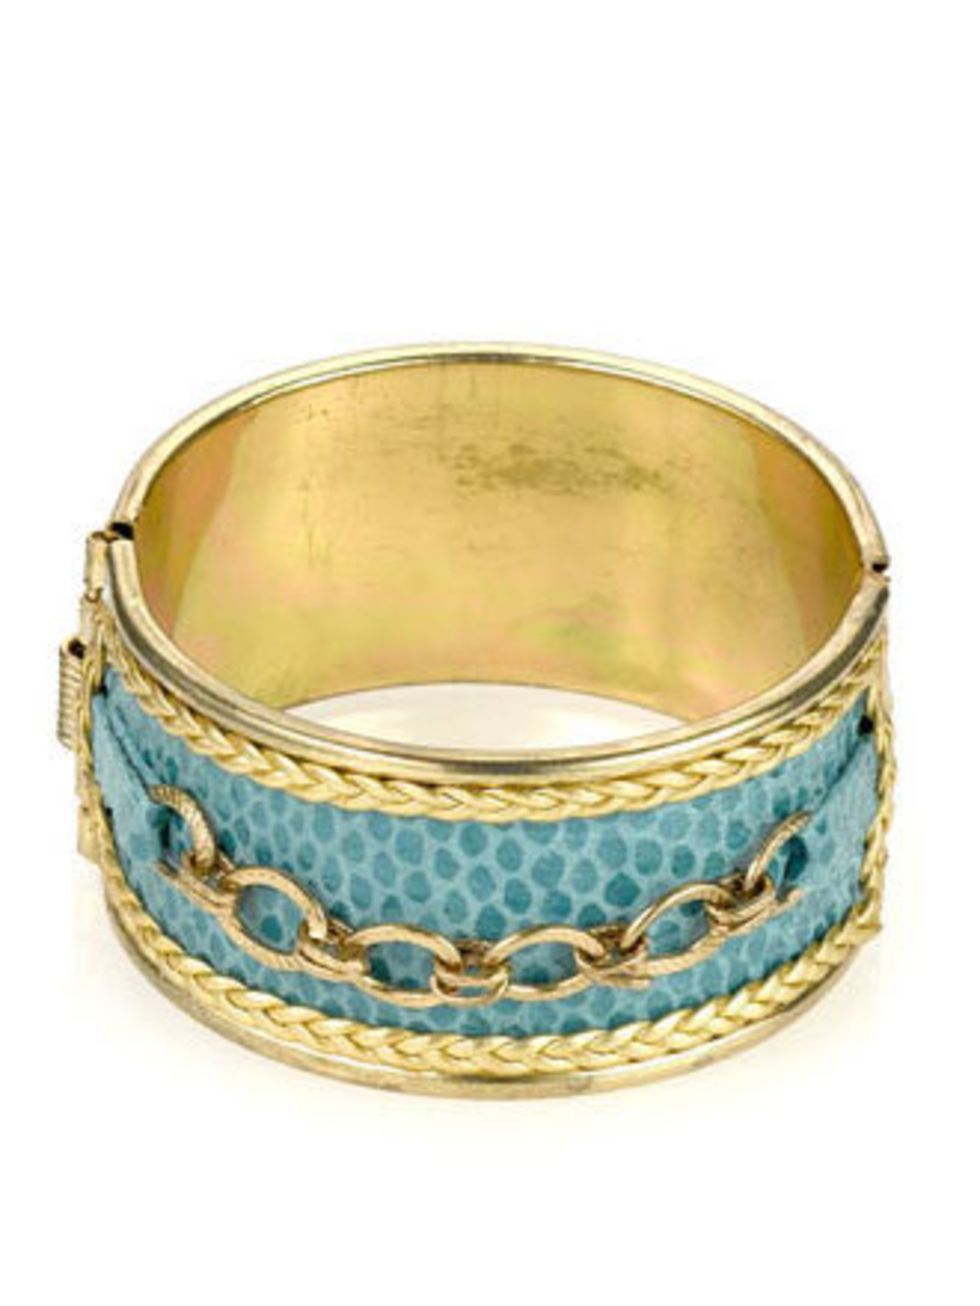 <p>You can never have too much jewellery (well, it doesnt take up that much space), so slip your wrist into this turquoise and gold number. Its a great statement piece, without the hefty price tag.</p><p>Cuff, £10 by <a href="http://www.monsoon.co.uk/in